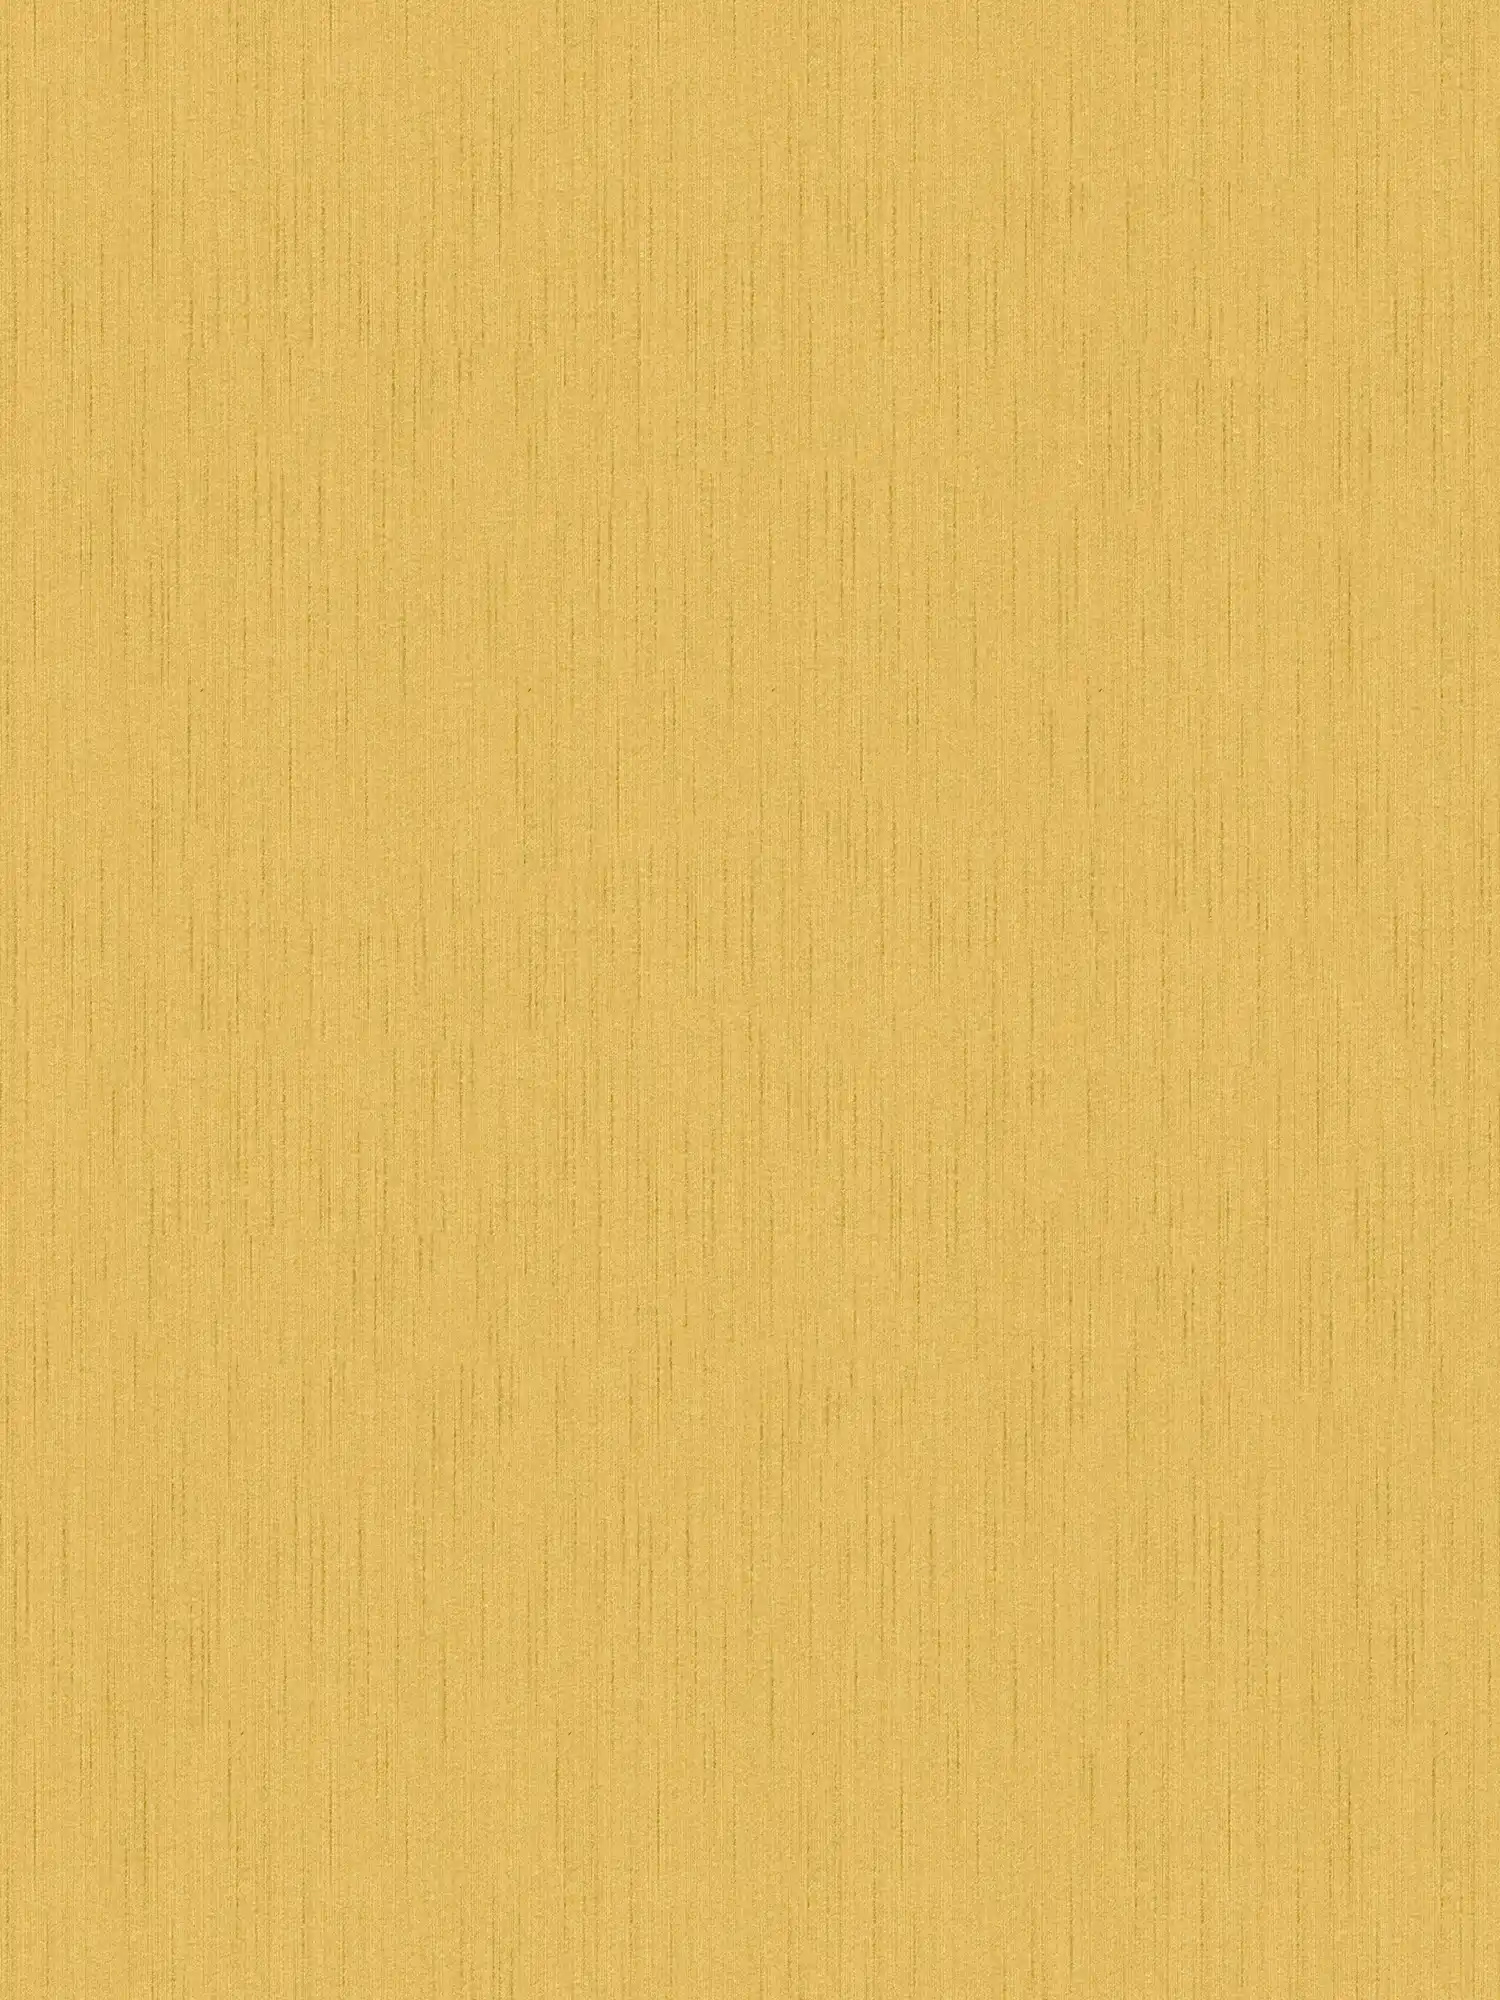 Mustard yellow wallpaper non-woven with mottled pattern - yellow
